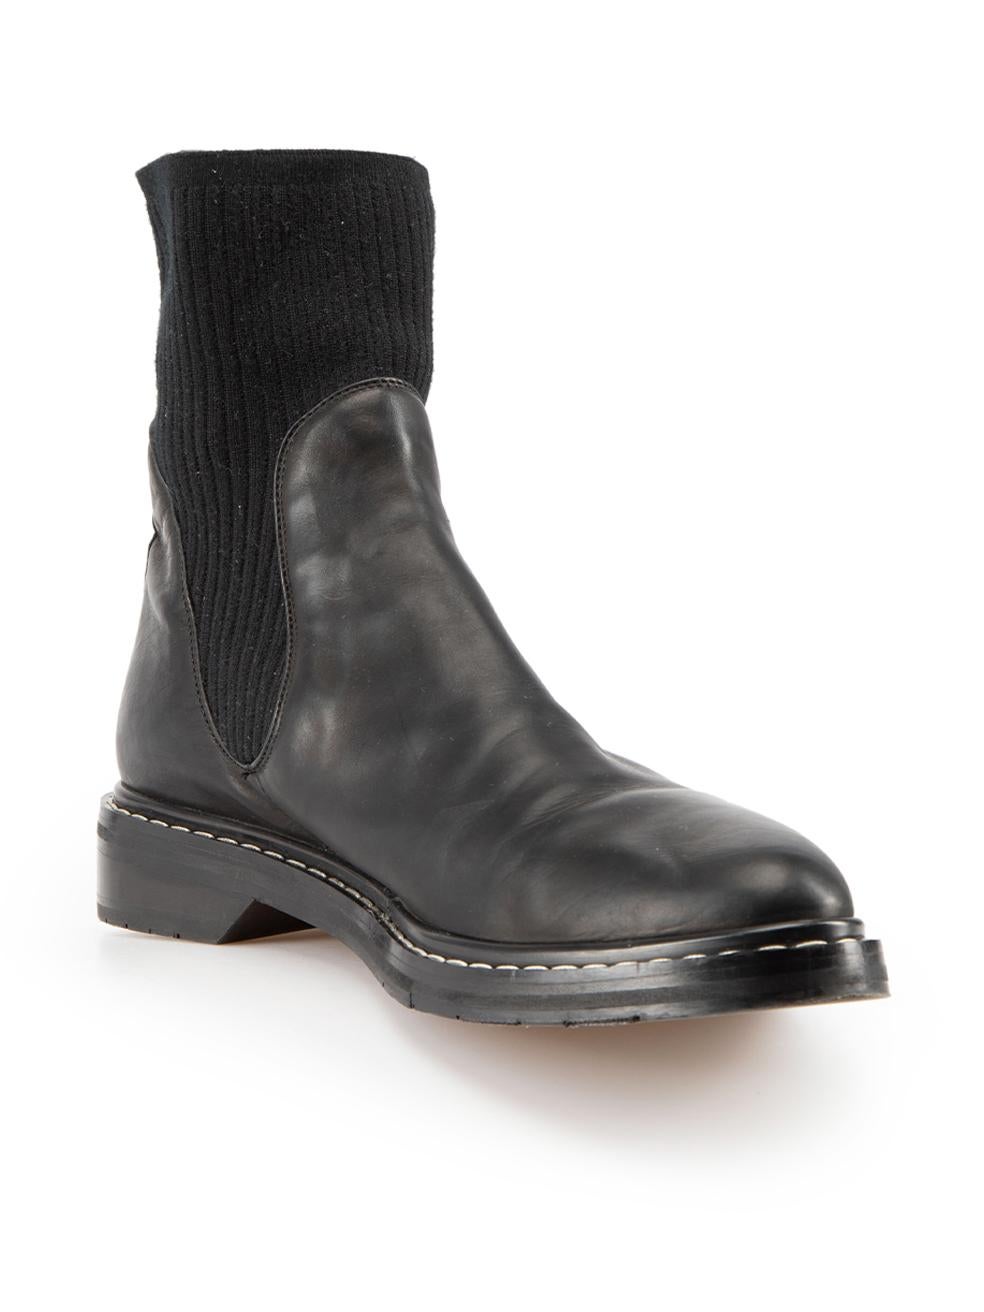 CONDITION is Very good. Minimal wear to boots is evident. Minimal wear to cashmere knit where pilling is evident. Minor scratch to back of wooden heel is visible on this used The Row designer resale item.



Details


Fara

Black

Leather

Ankle